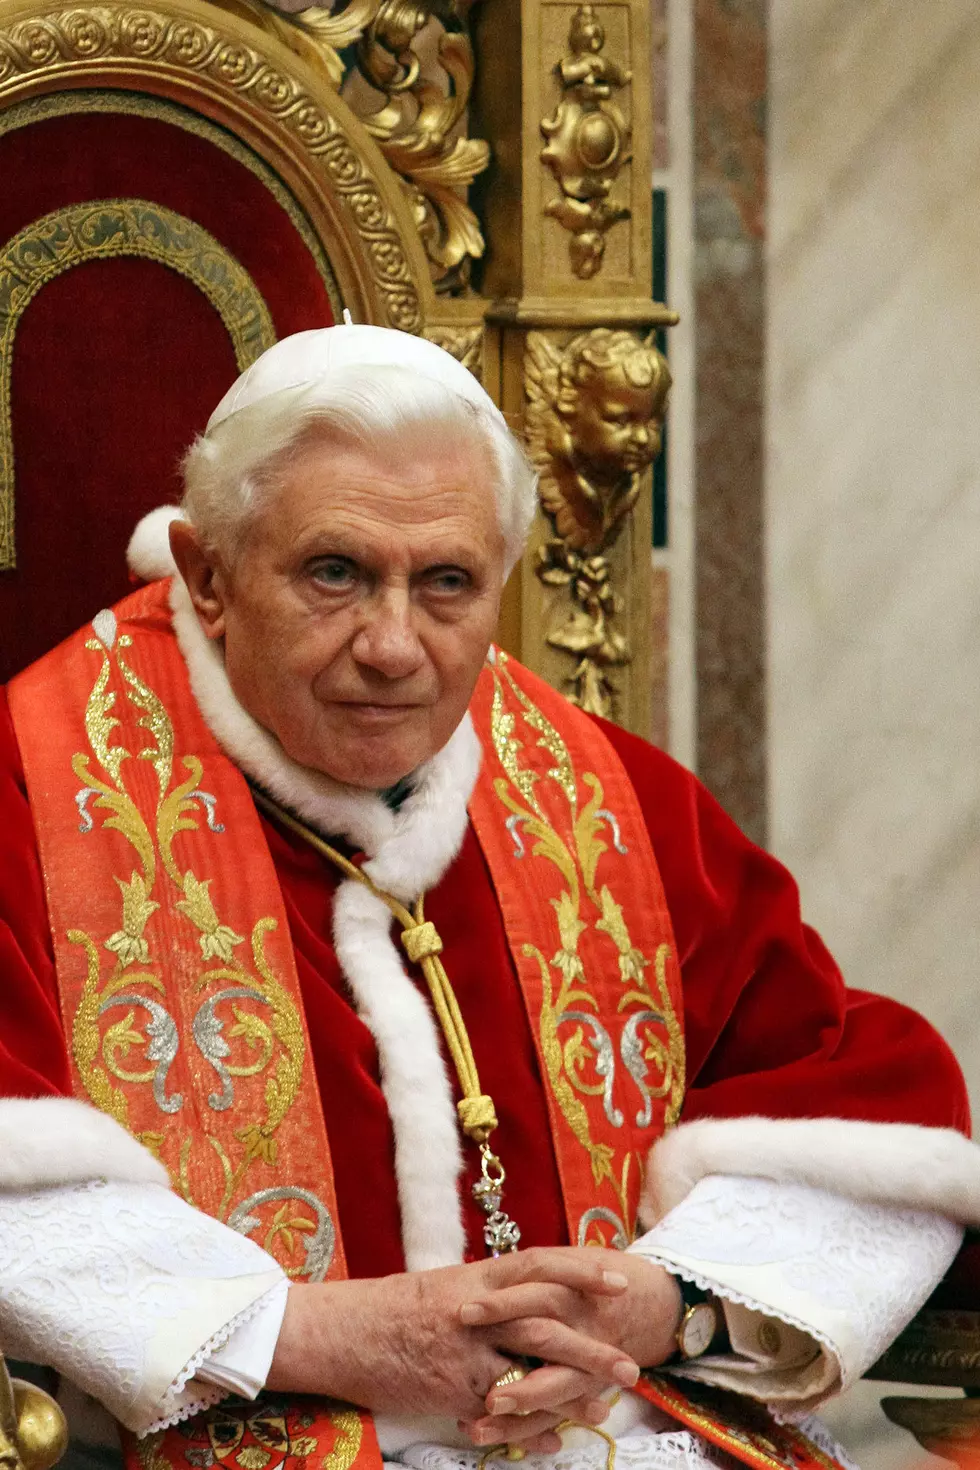 Pope Benedict’s Organs:  The Church is Keeping Them